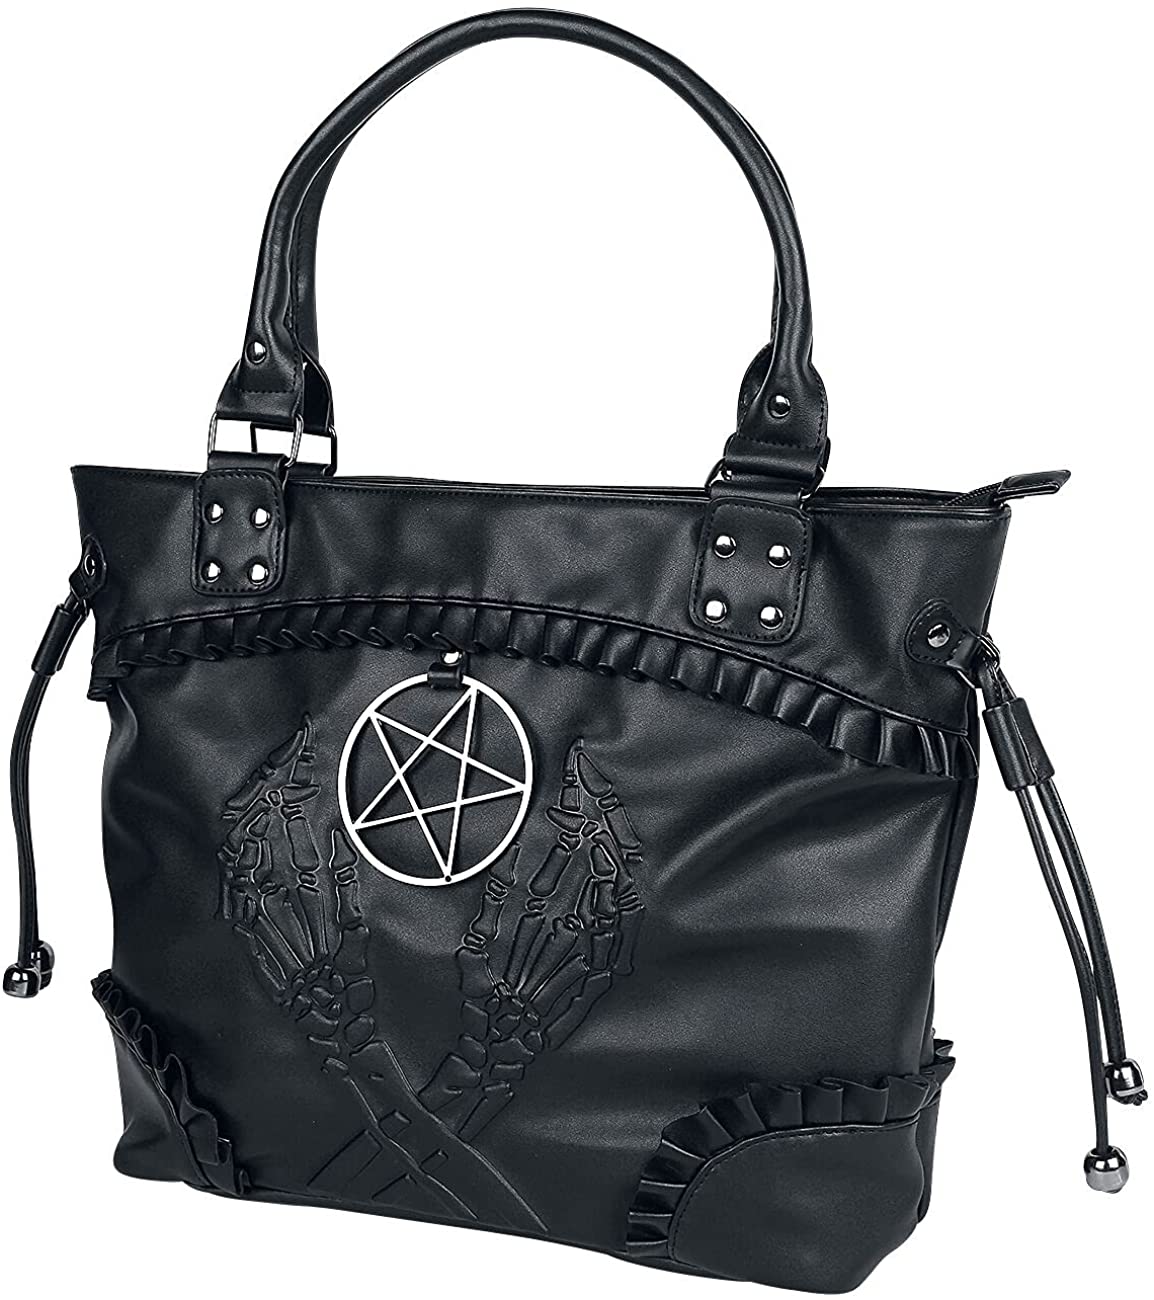 Lost Queen Greeting From The Other Side Bag